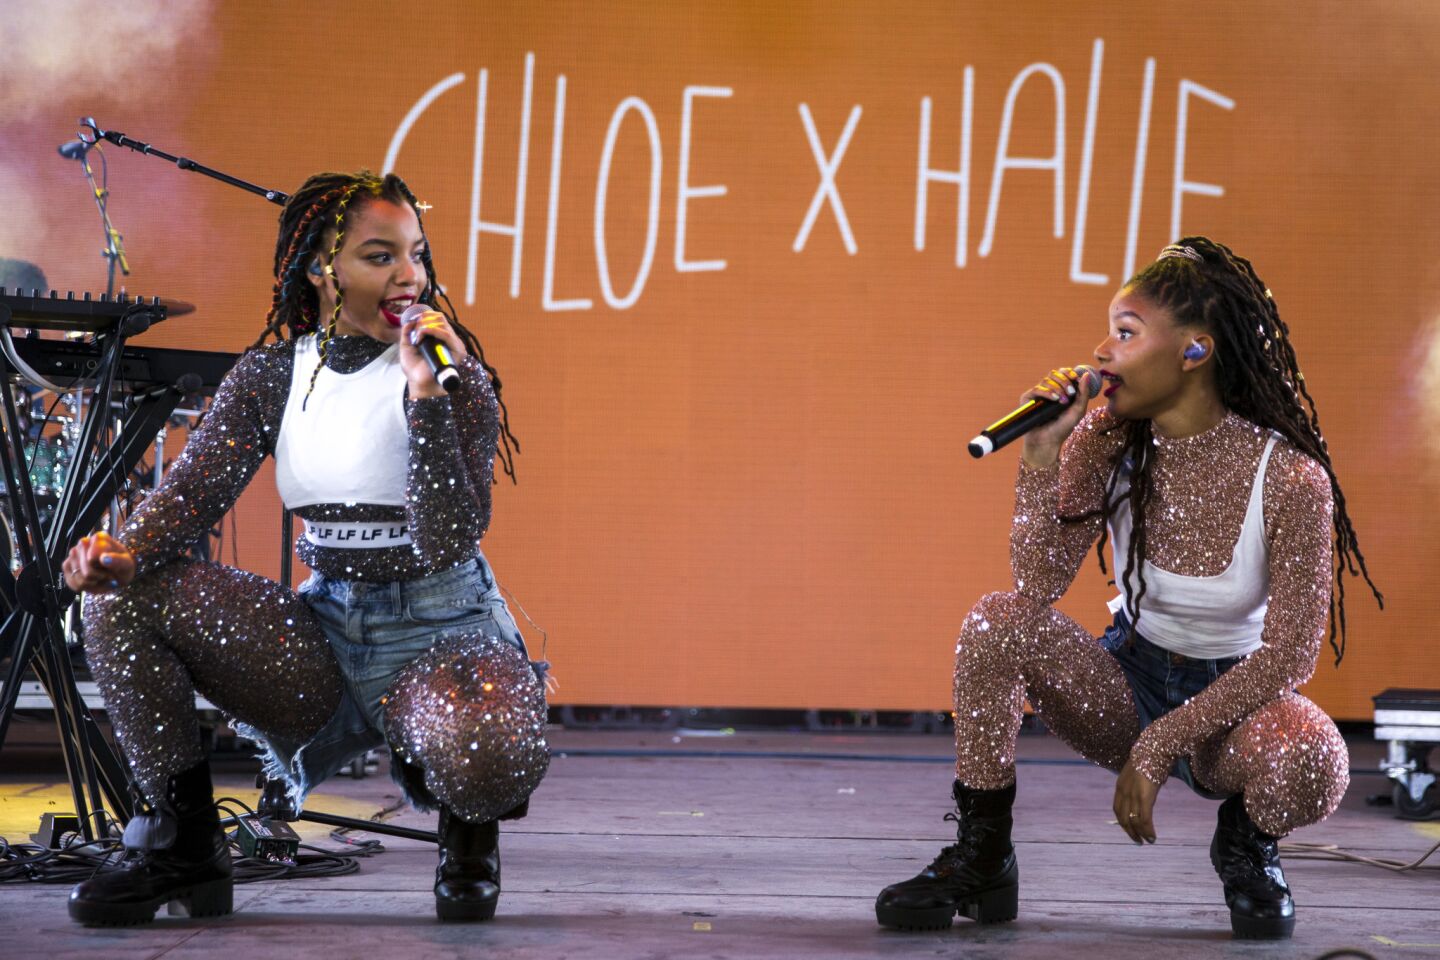 Chloe Bailey, left, and Halle Bailey of Chloe x Halle perform during Day 2 of the Coachella Valley Arts and Music Festival at the Empire Polo Grounds on April 14 in Indio.